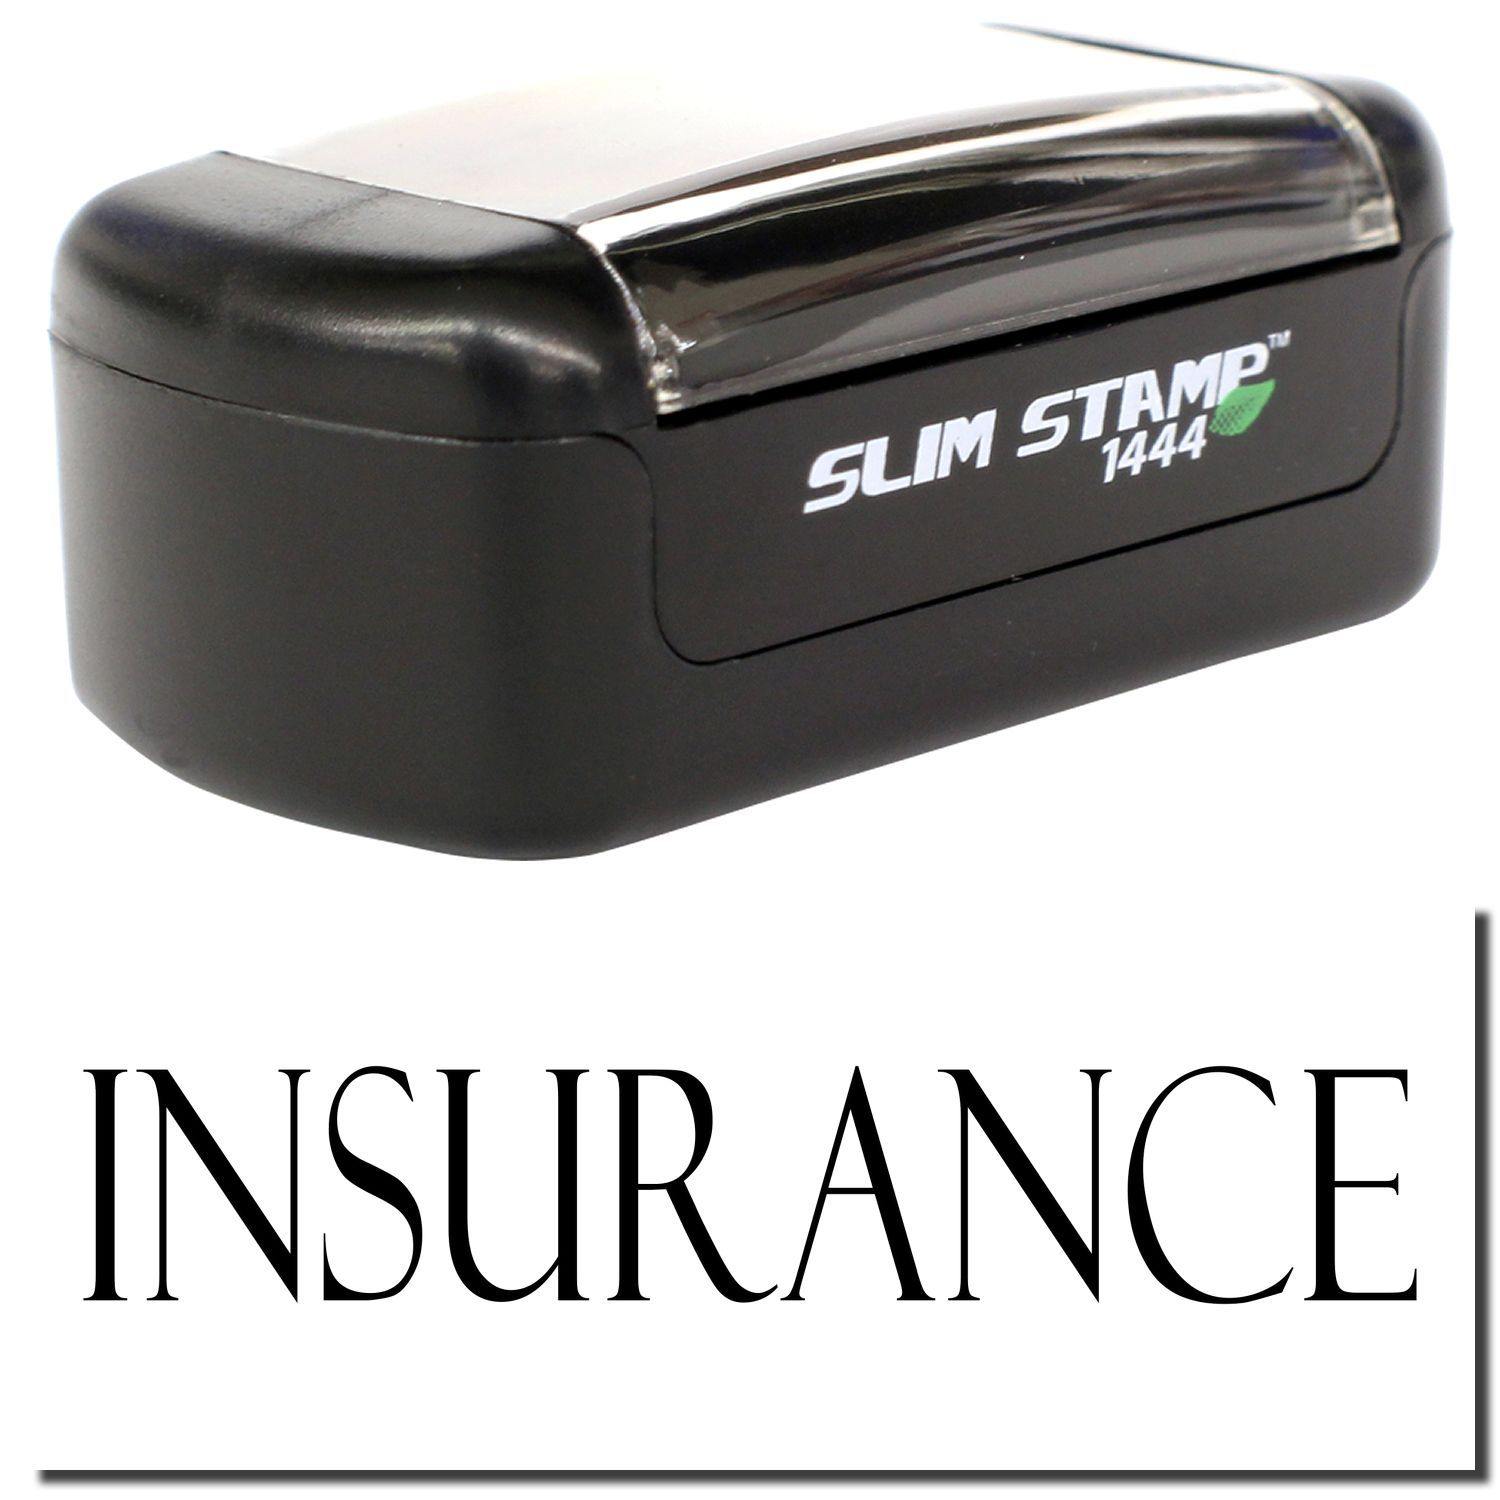 A stock office pre-inked stamp with a stamped image showing how the text "INSURANCE" is displayed after stamping.